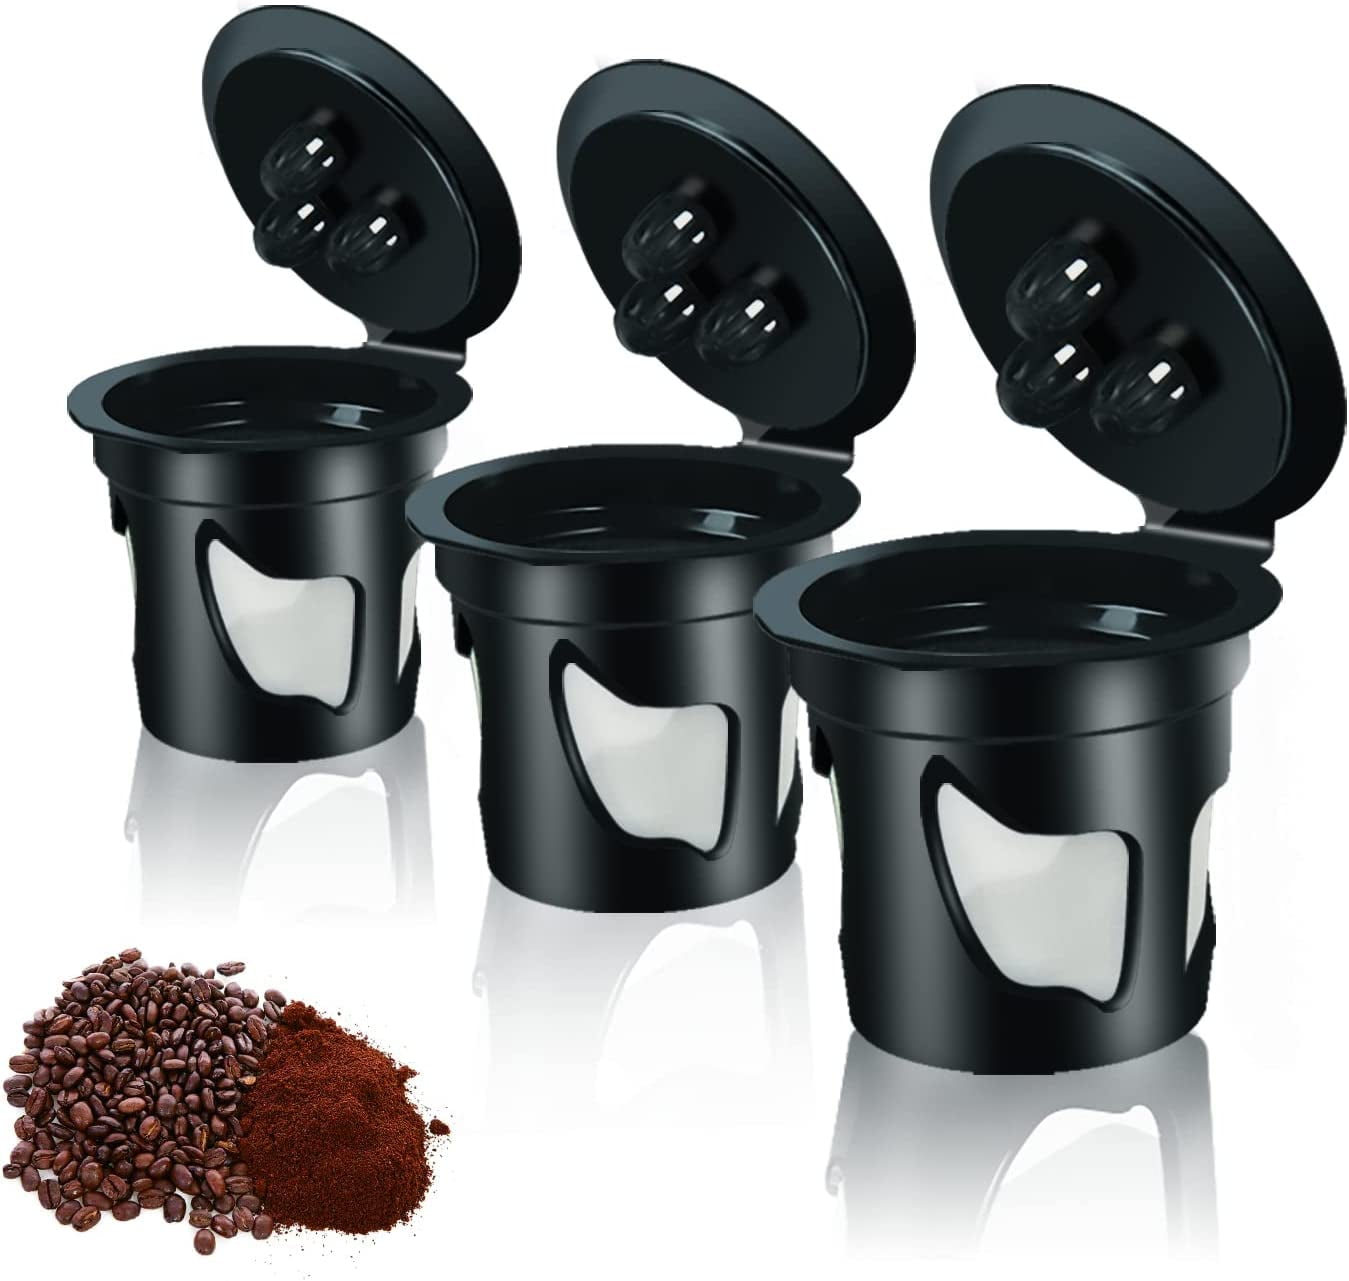  PUREHQ Ninja Water Filter for Ninja Dual Brew Coffee Maker and  Single Serve Pods Grounds PB051 - Compatible with DualBrew Pro CFP301  CFP307 - Includes Filter Holder, 3 Pack of Charcoal